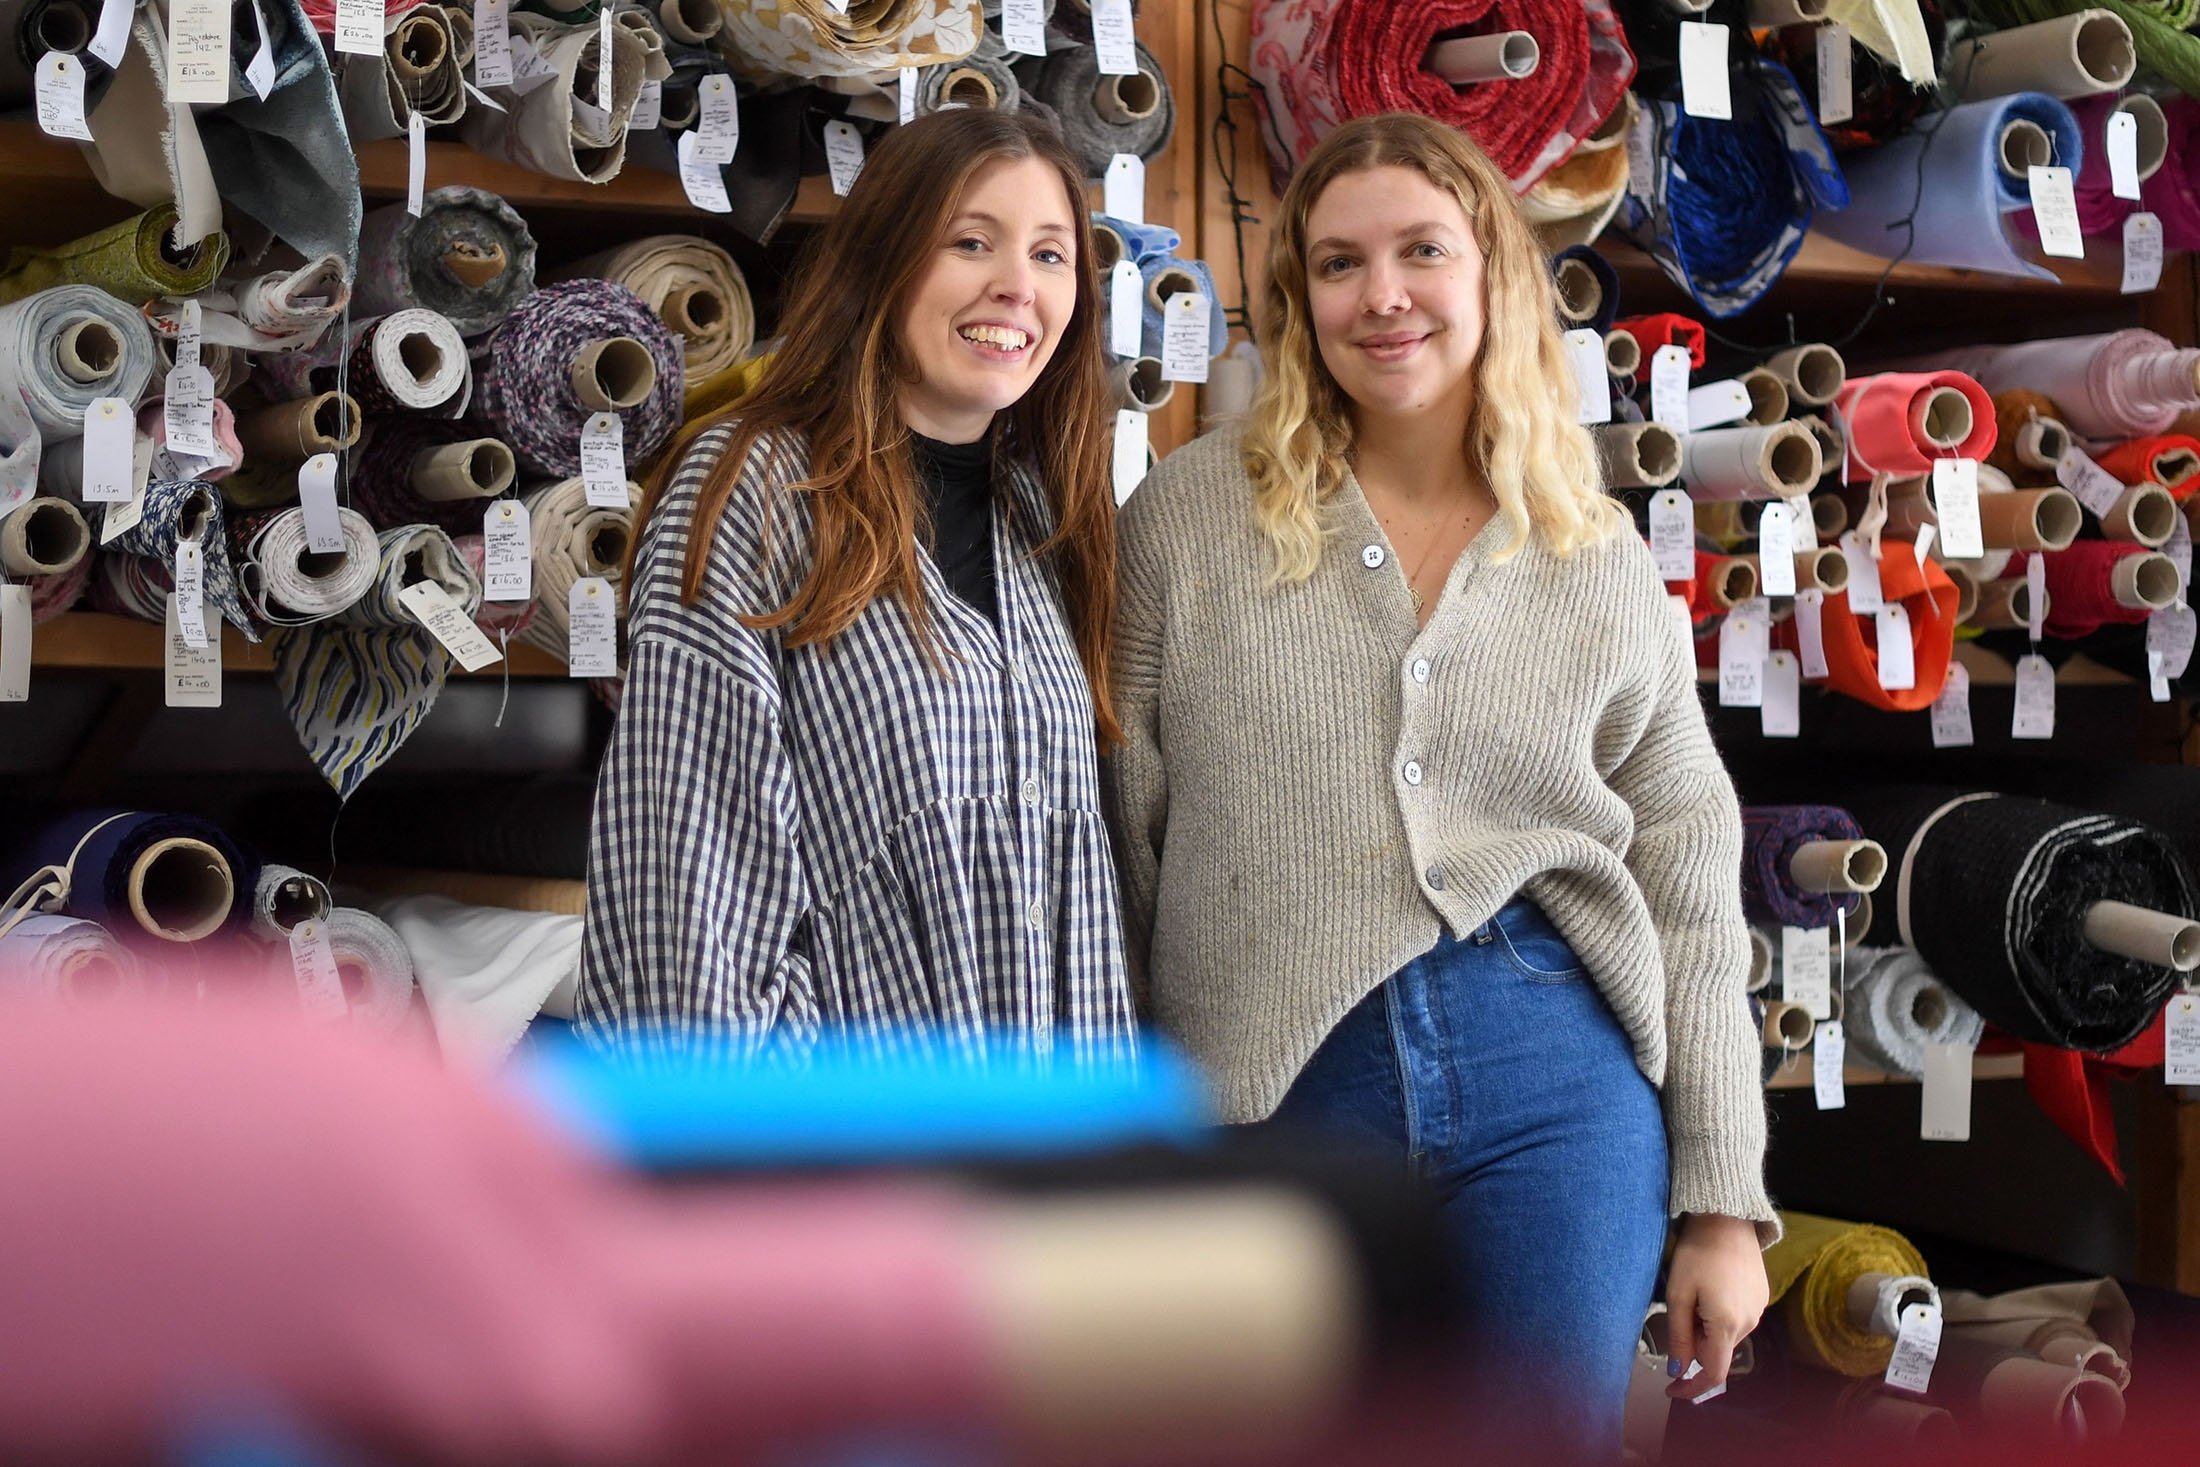 Rosie Scott (L) and Hannah Silvani, co-founders of The New Craft House, a sewing workshop studio and designer deadstock fabric shop, in Hackney, East London, U.K., Feb. 11, 2022. (AFP Photo)